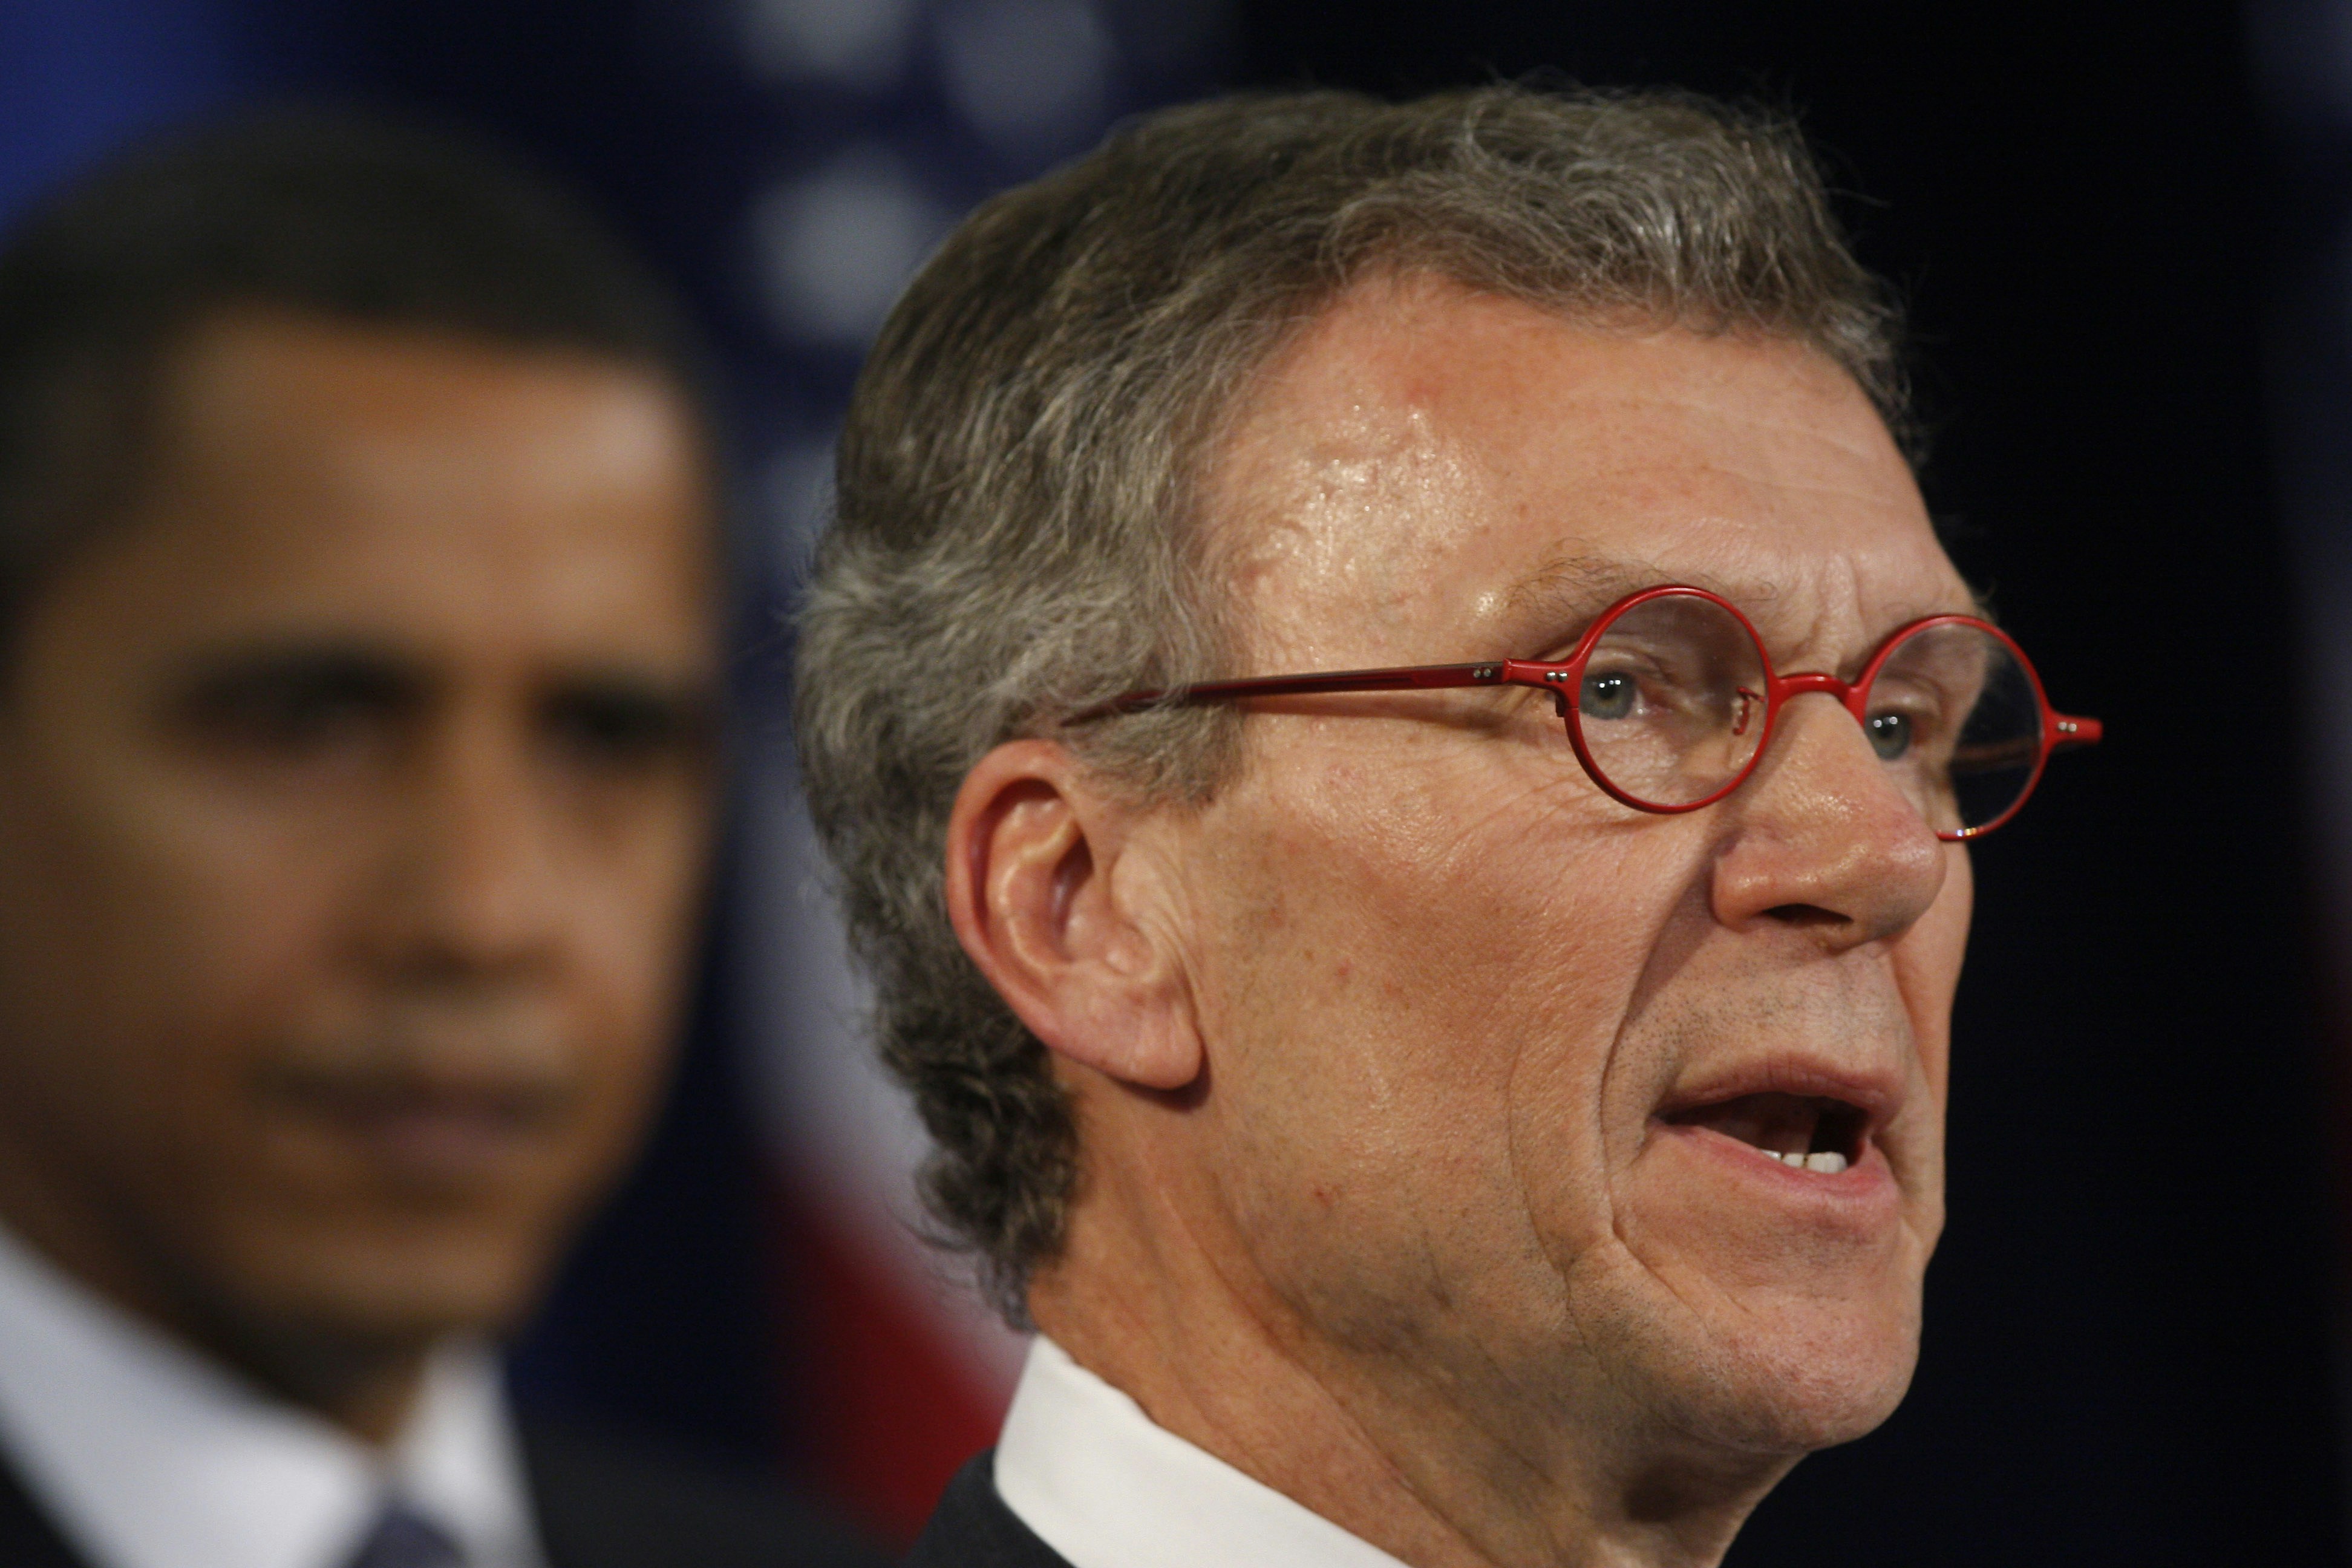 CHICAGO - DECEMBER 11: Former Senate Majority Leader Tom Daschle (R) speaks during a press conference after being introduced by President-Elect Barack Obama as his Health and Human Services Secretary-designate  during a press conference at the Hilton hotel December 11, 2008 in Chicago, Illinois. Daschle was also named as director of the White House office of health reform. Obama spoke about the future of the nation's health care system(Photo by Joshua Lott/Getty Images)